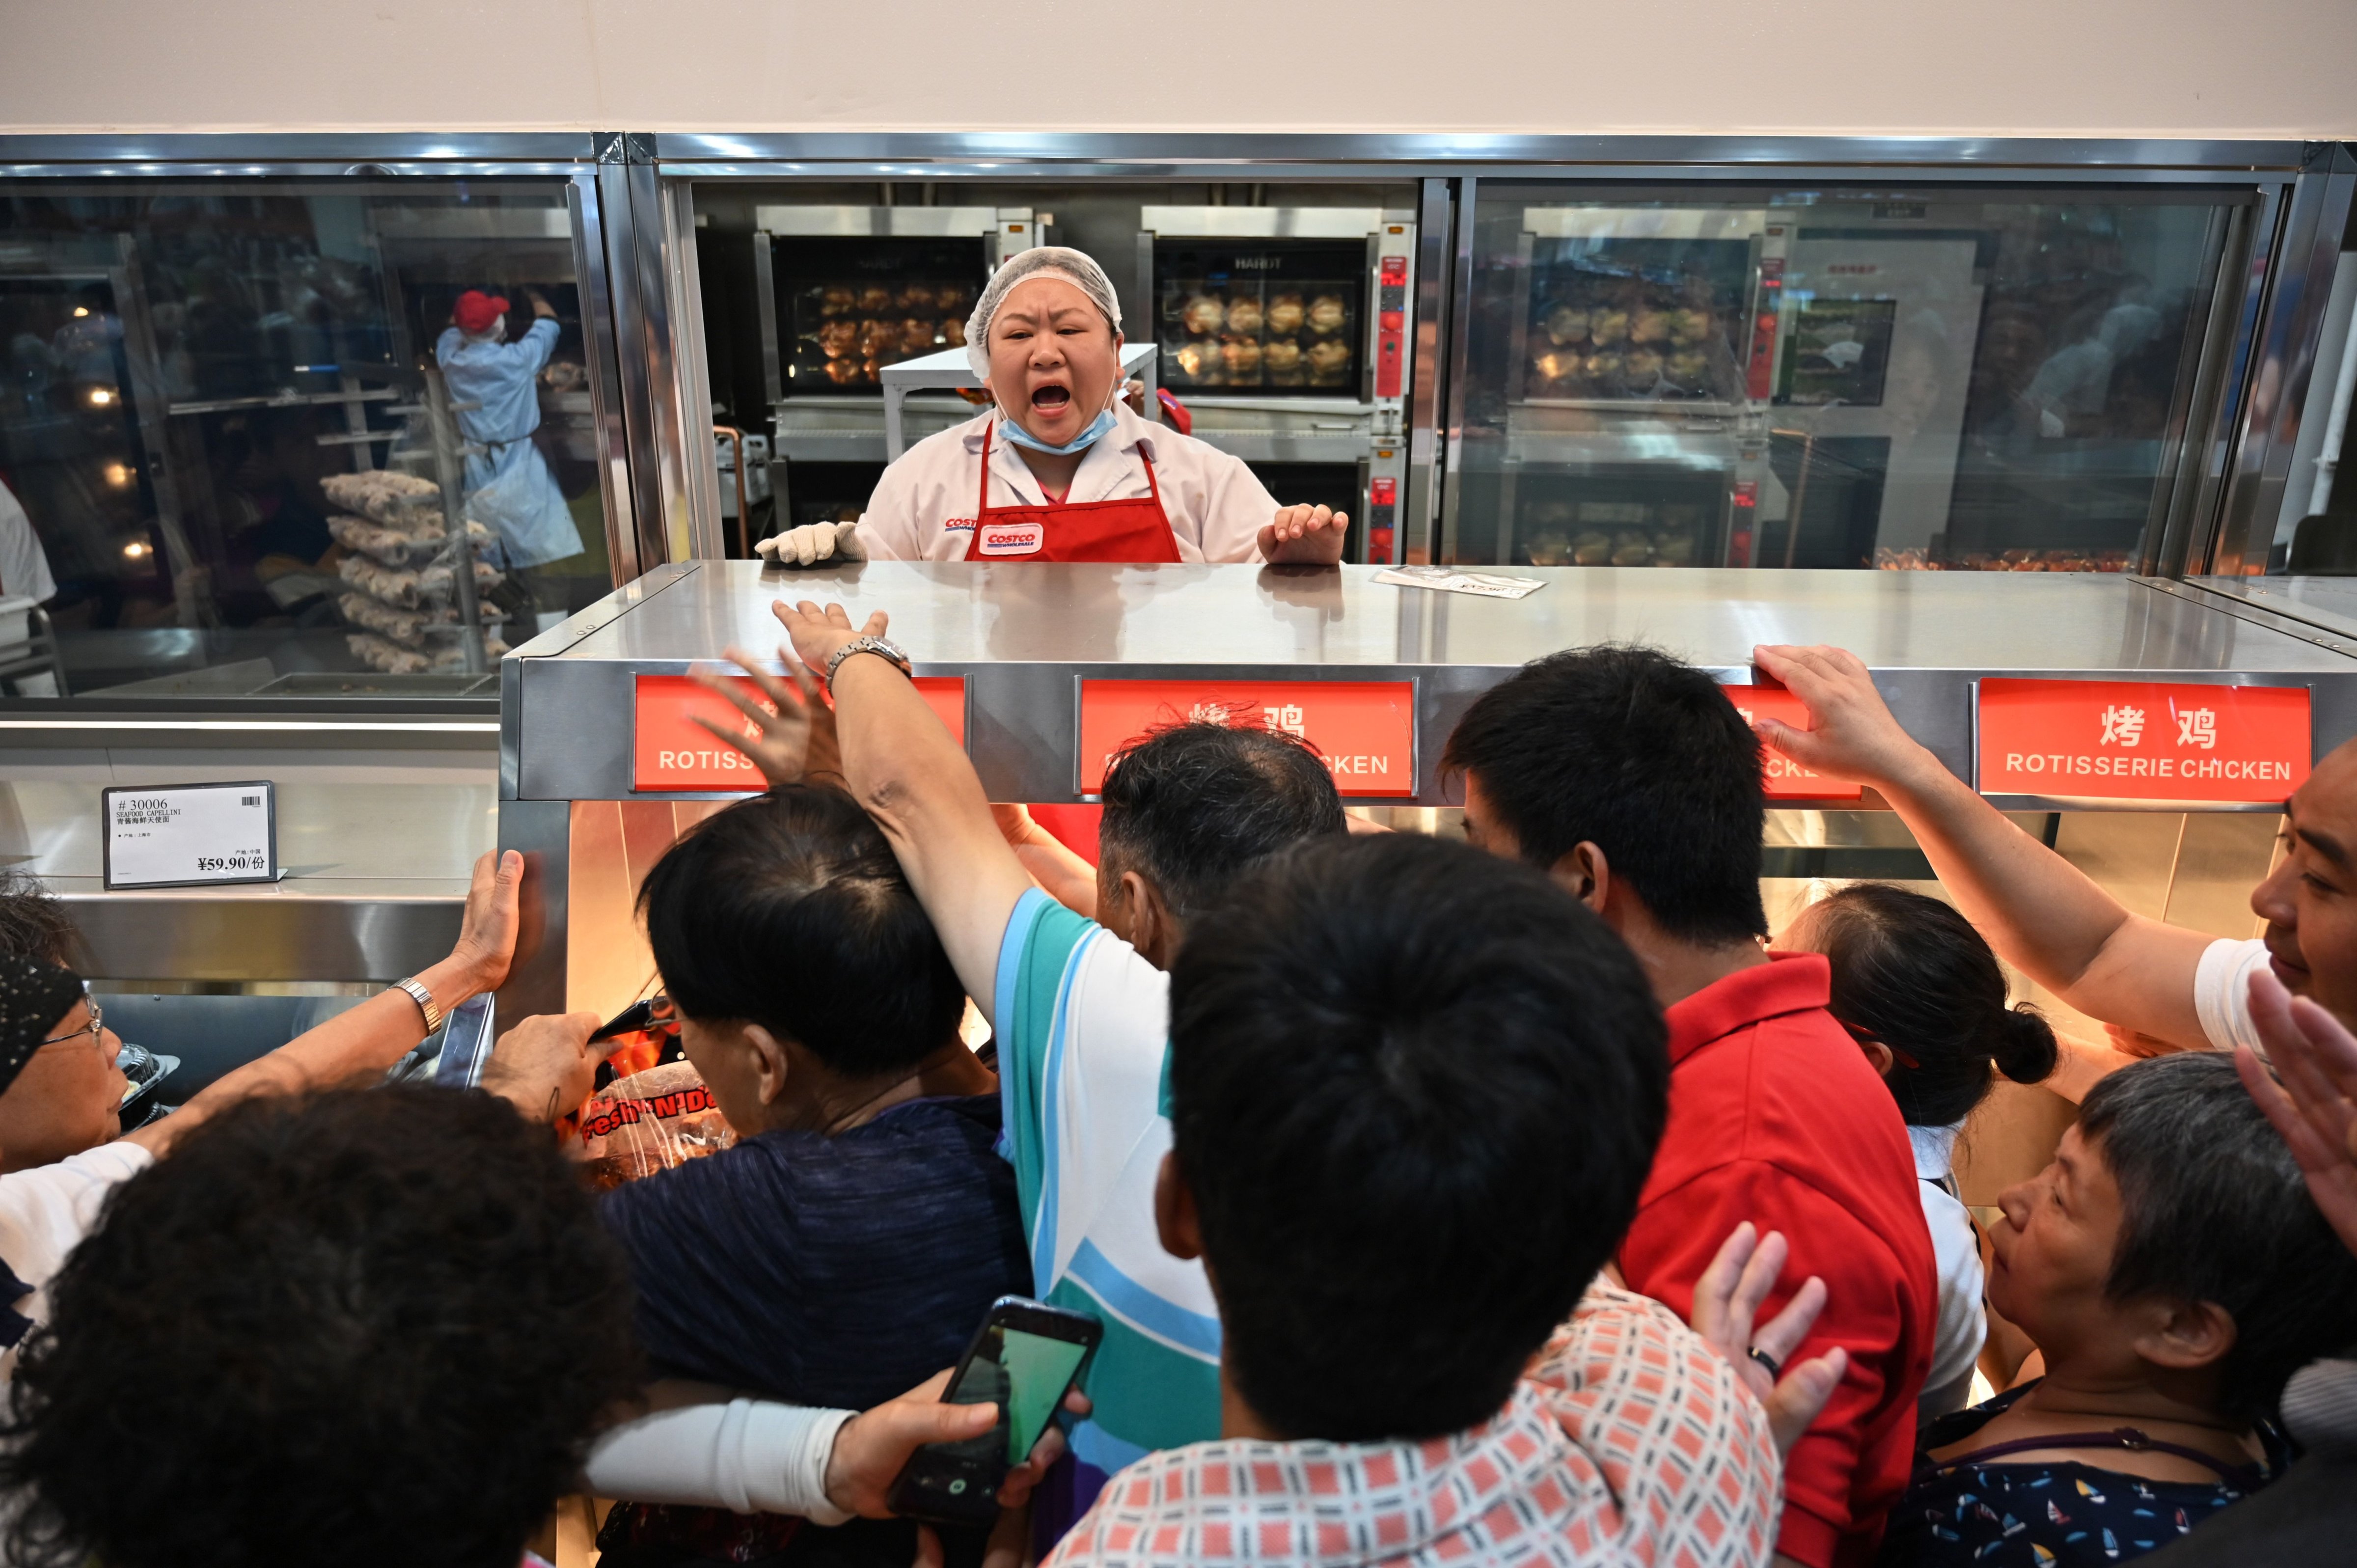 People try to get a roast chicken at the first Costco outlet in China, on the stores opening day in Shanghai on August 27, 2019. (HECTOR RETAMAL—AFP/Getty Images)